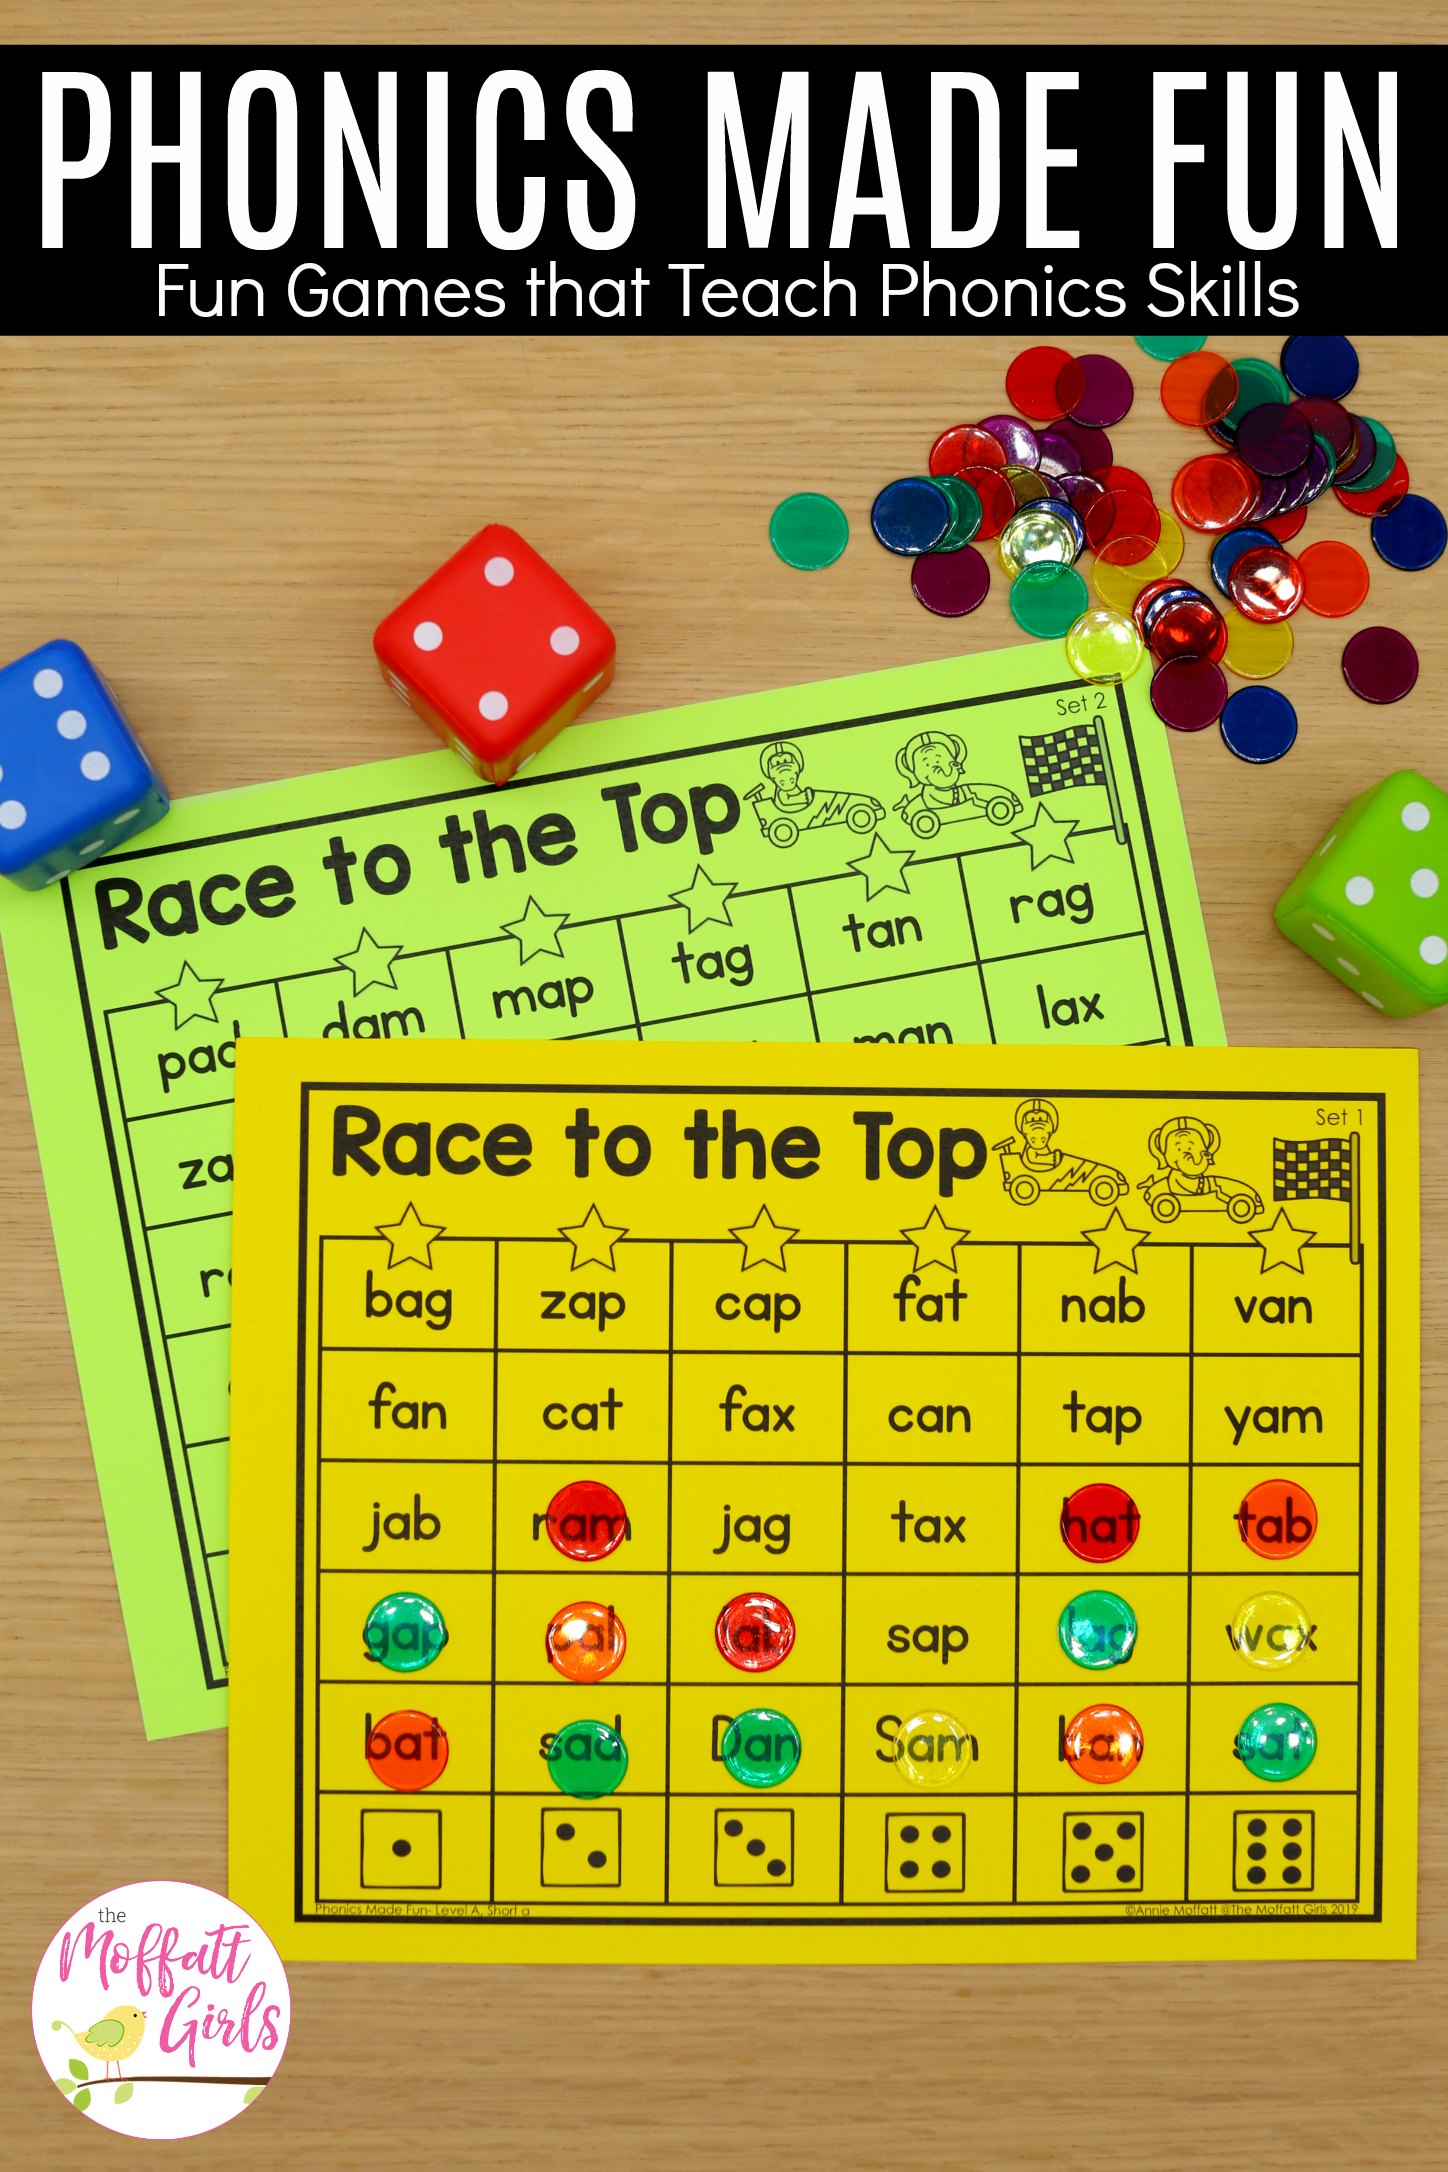 Phonics-Games-Race-to-the-Top-2b